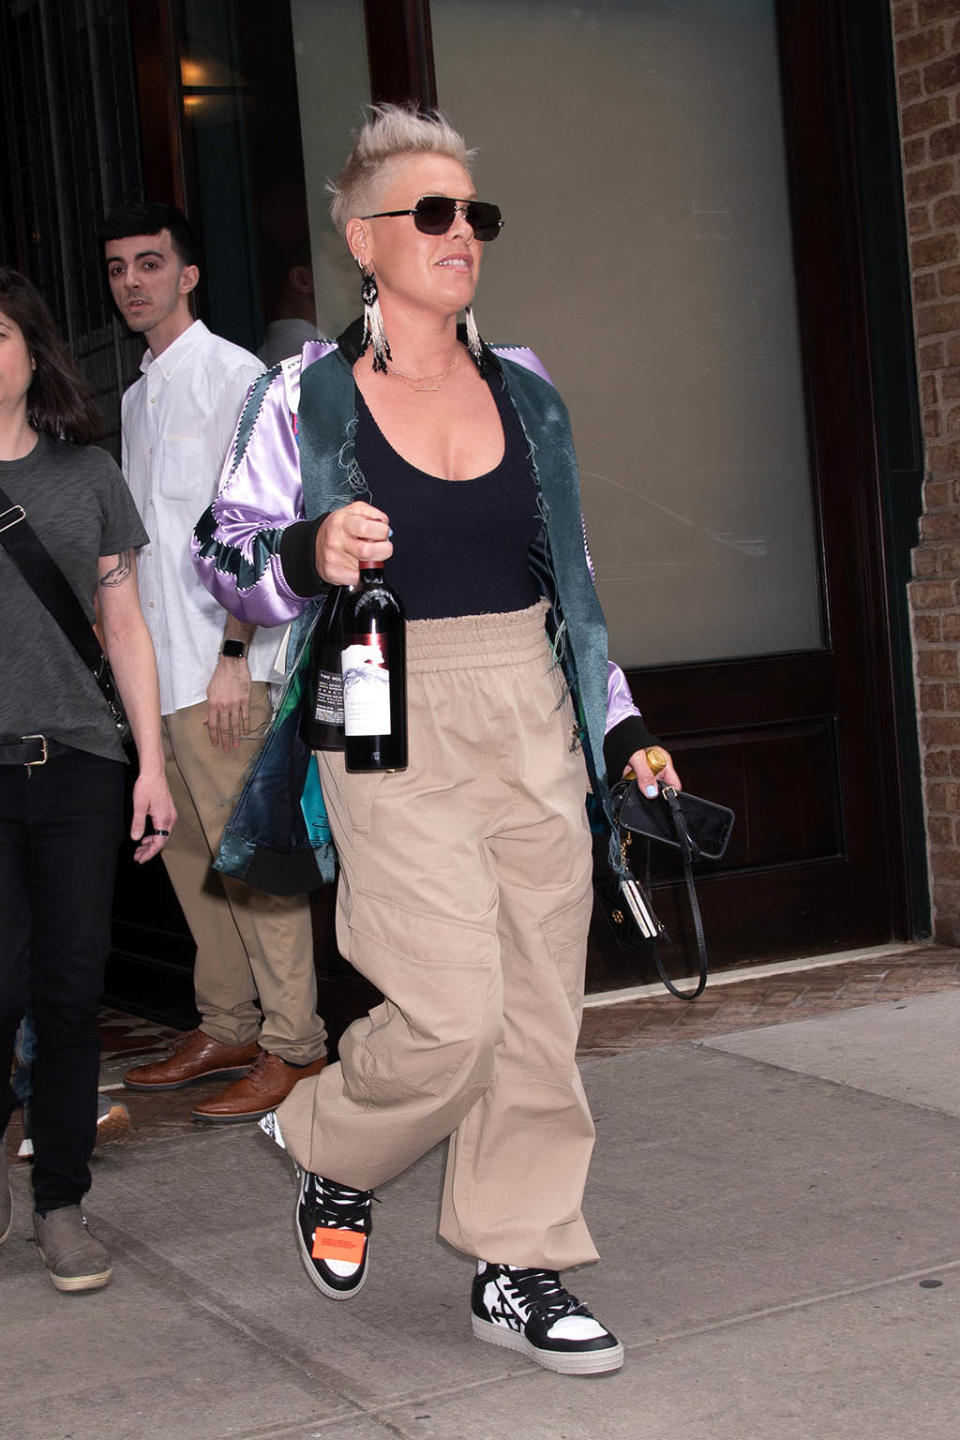 Pink spotted out and about in New York City on June 23, 2022. - Credit: MEGA